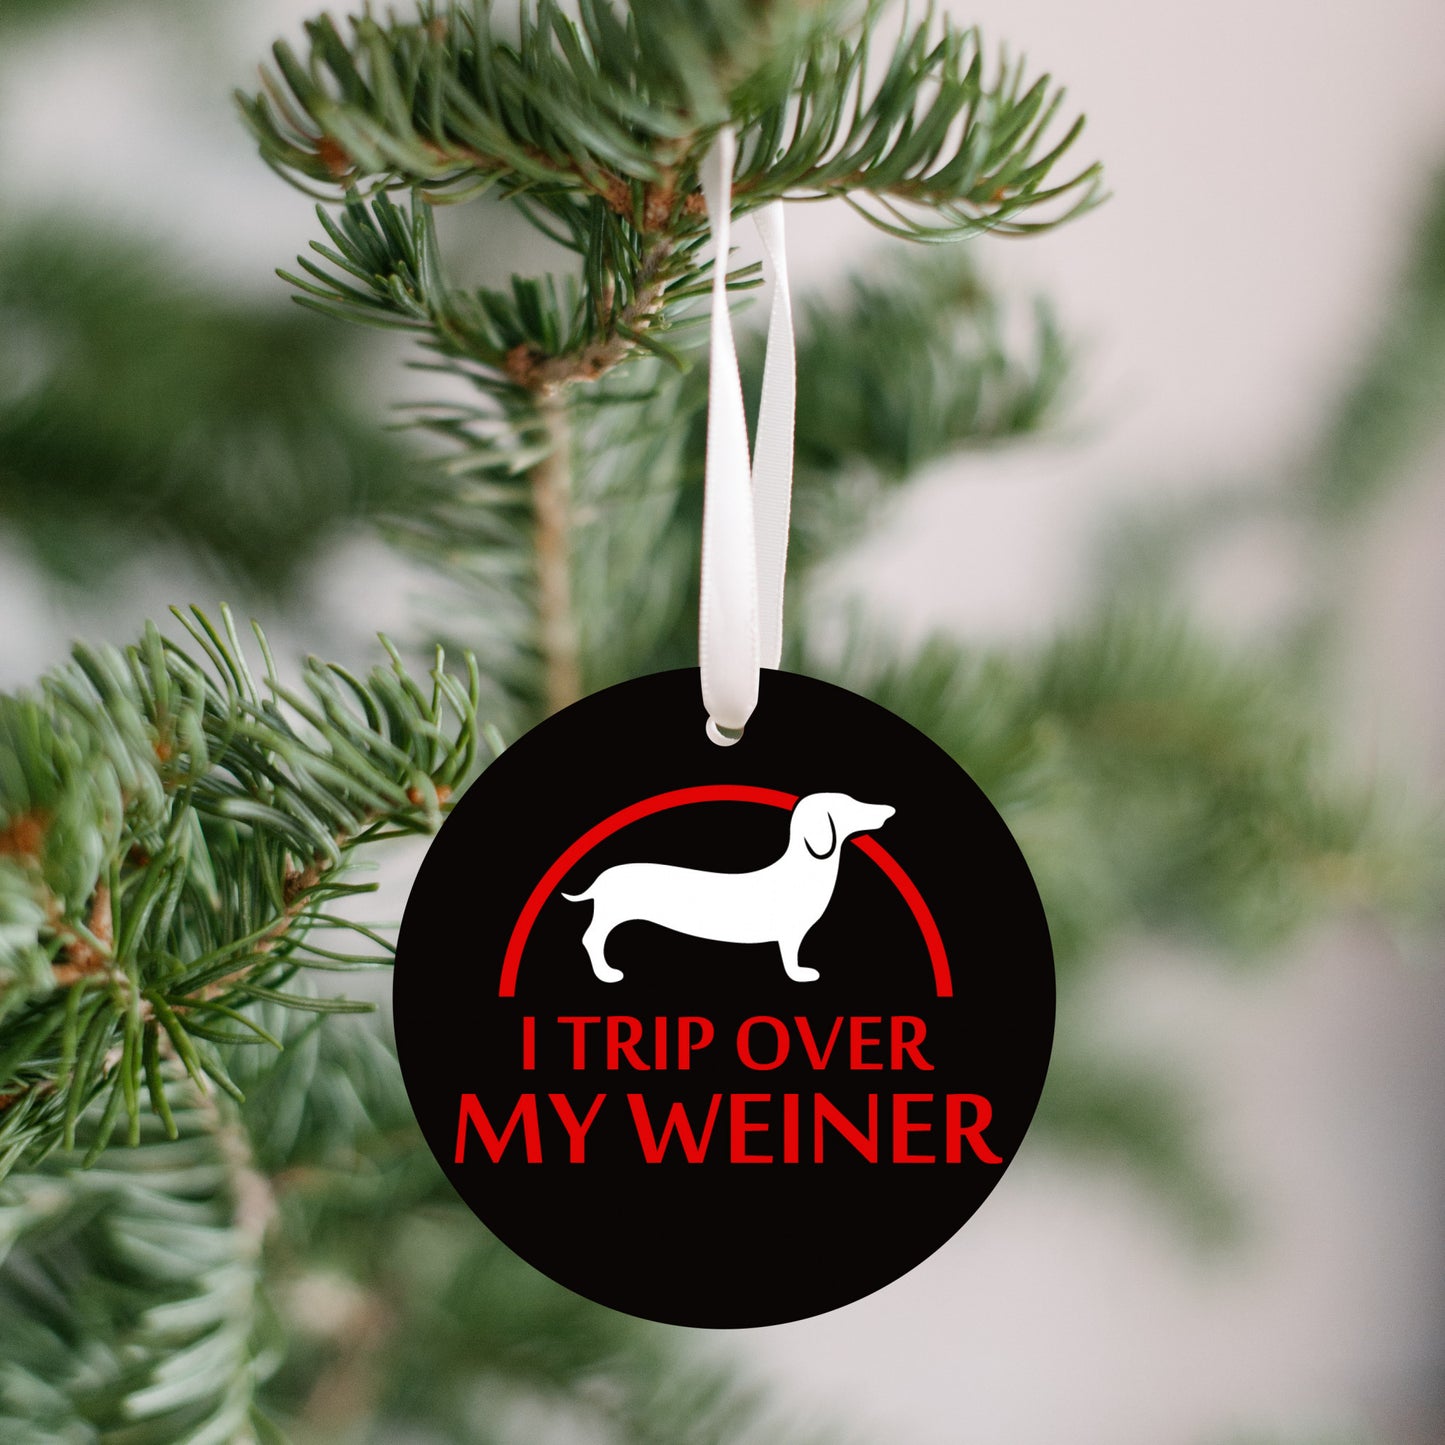 I TRIP OVER MY WEINER Ornament